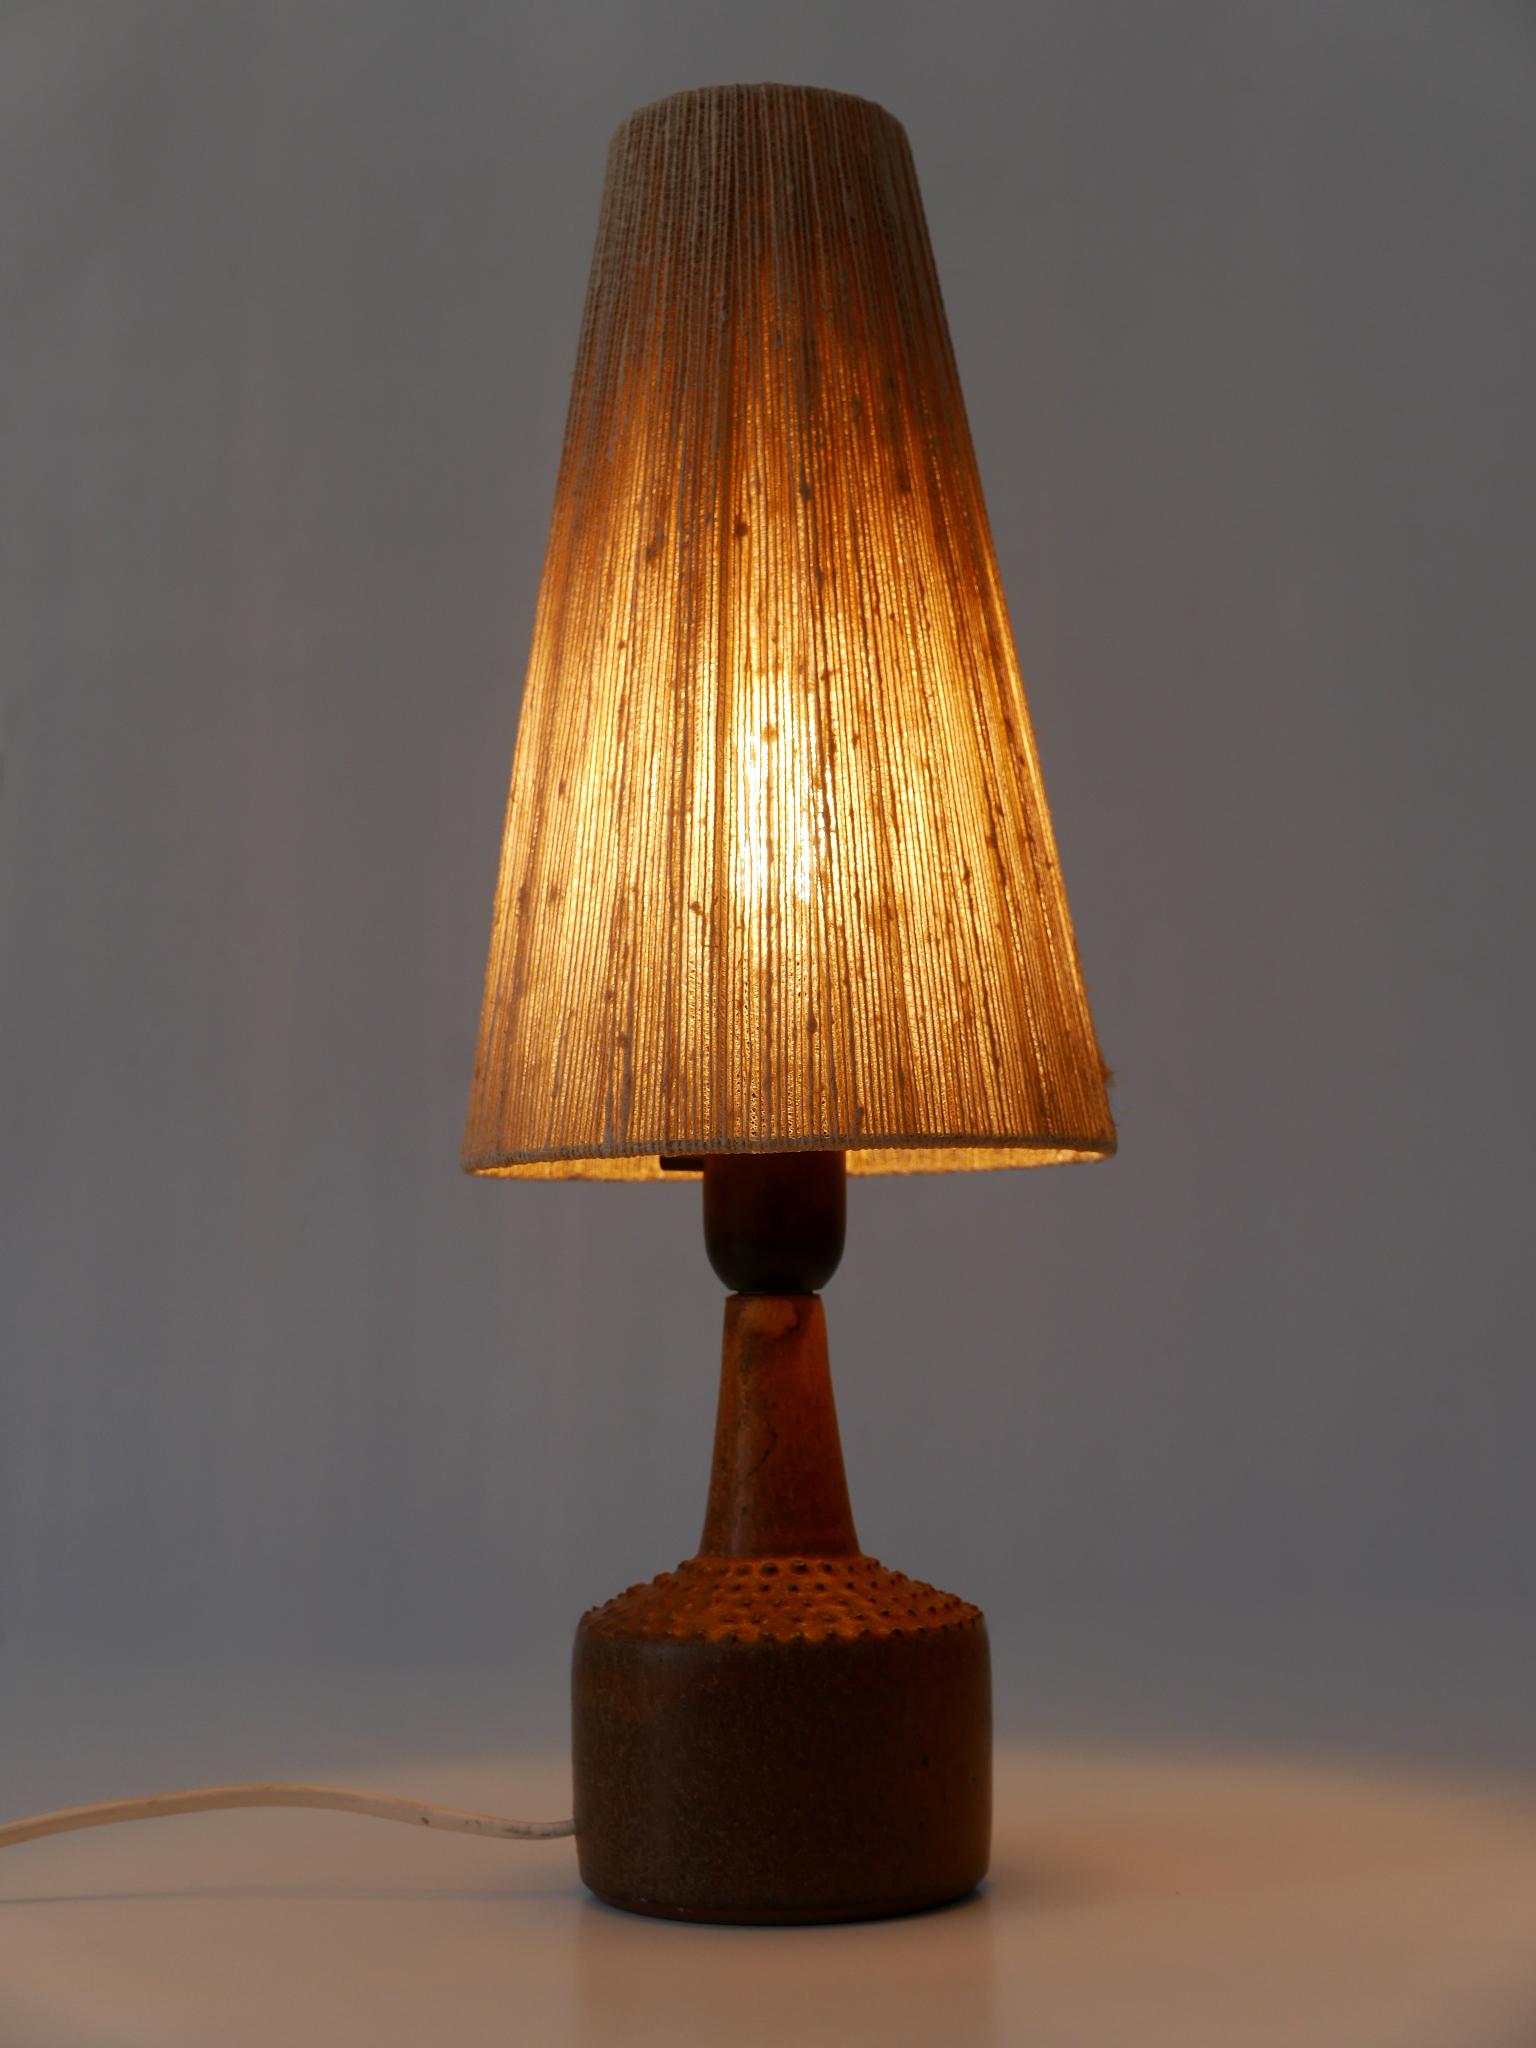 Mid-20th Century Rare Mid-Century Glazed Stoneware Table Lamp by Rolf Palm for Mölle Sweden 1962